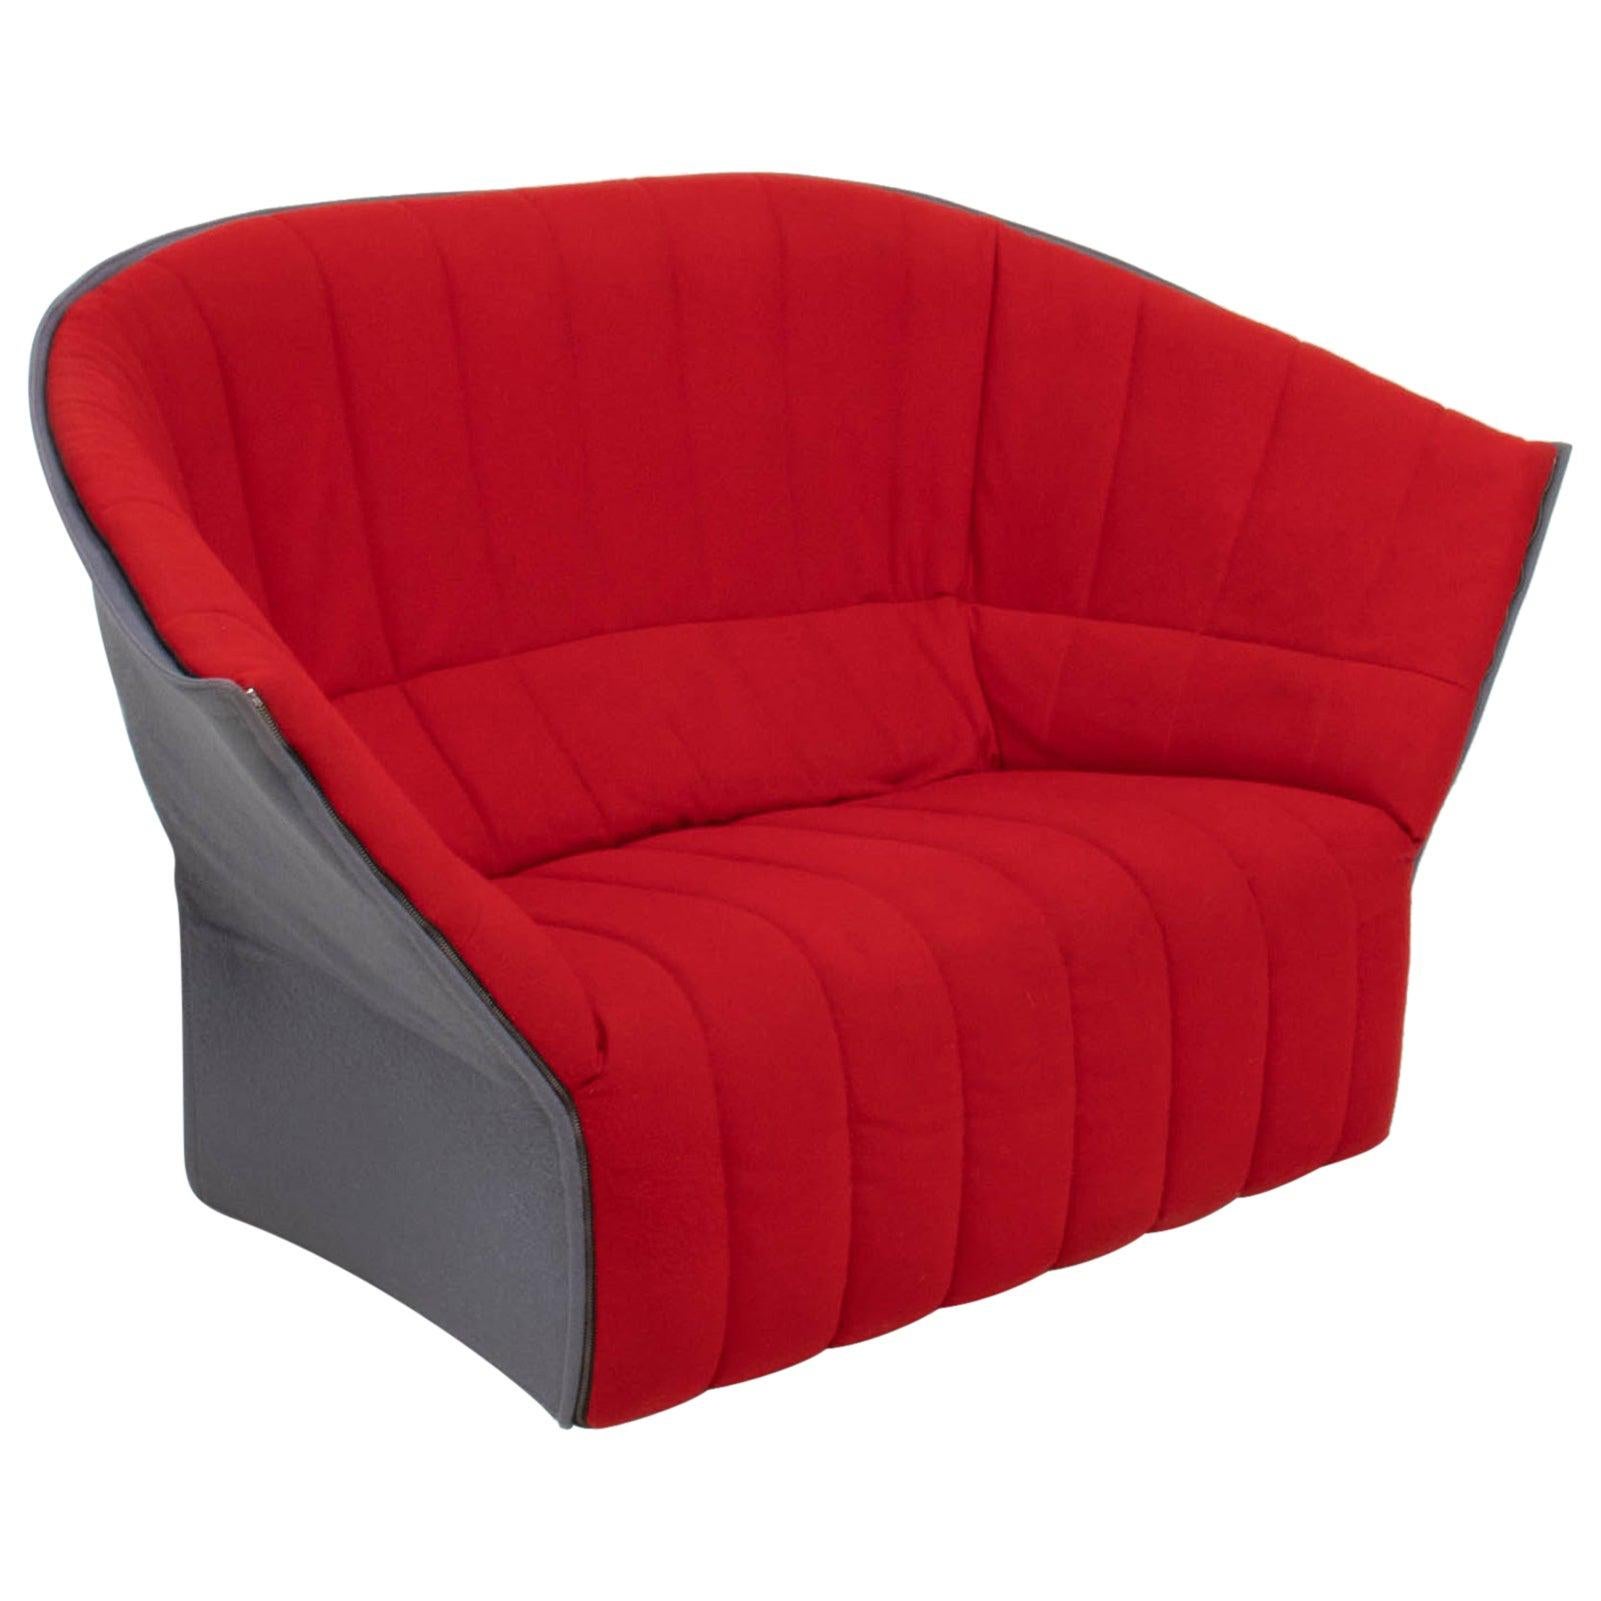 Ligne Roset by Inga Sempé Moel Red and Grey Quilted Loveseat Sofa, 2007